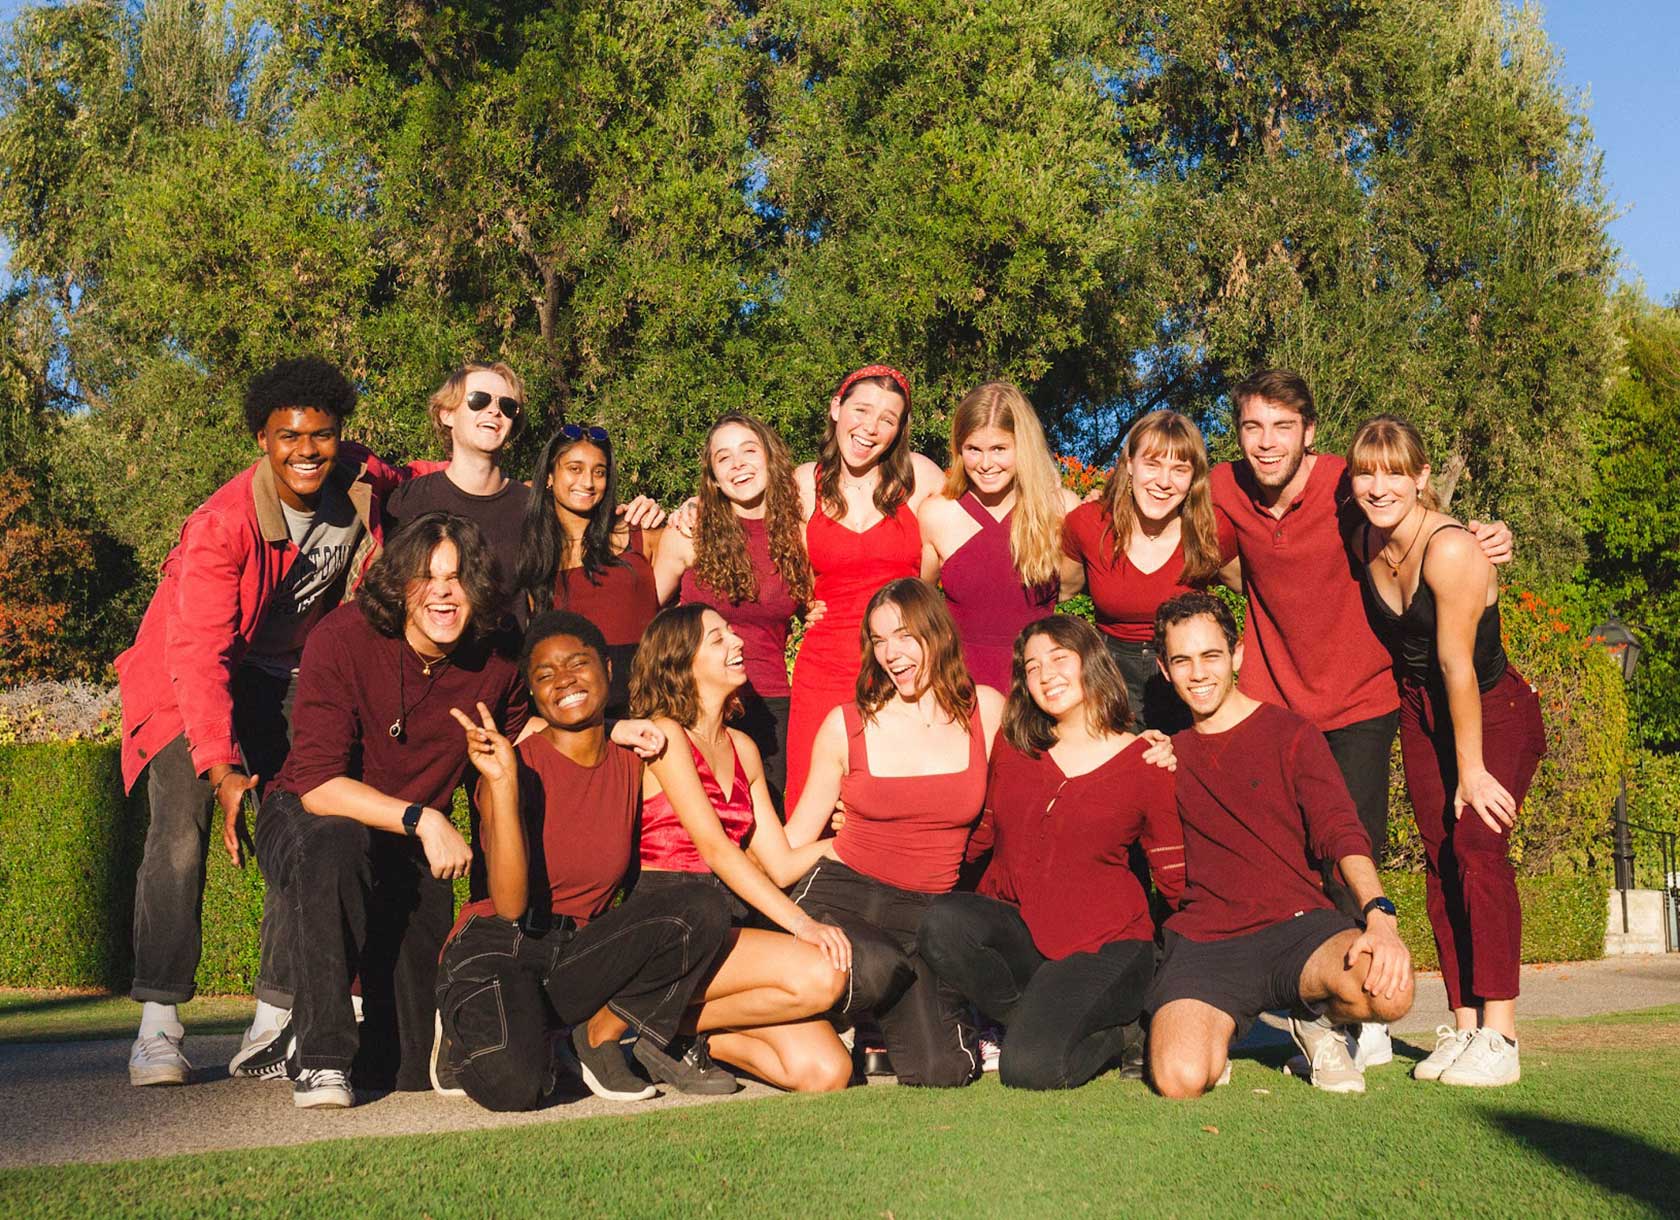 Members of the Claremont Shades, an all-gender 7C a capella music group